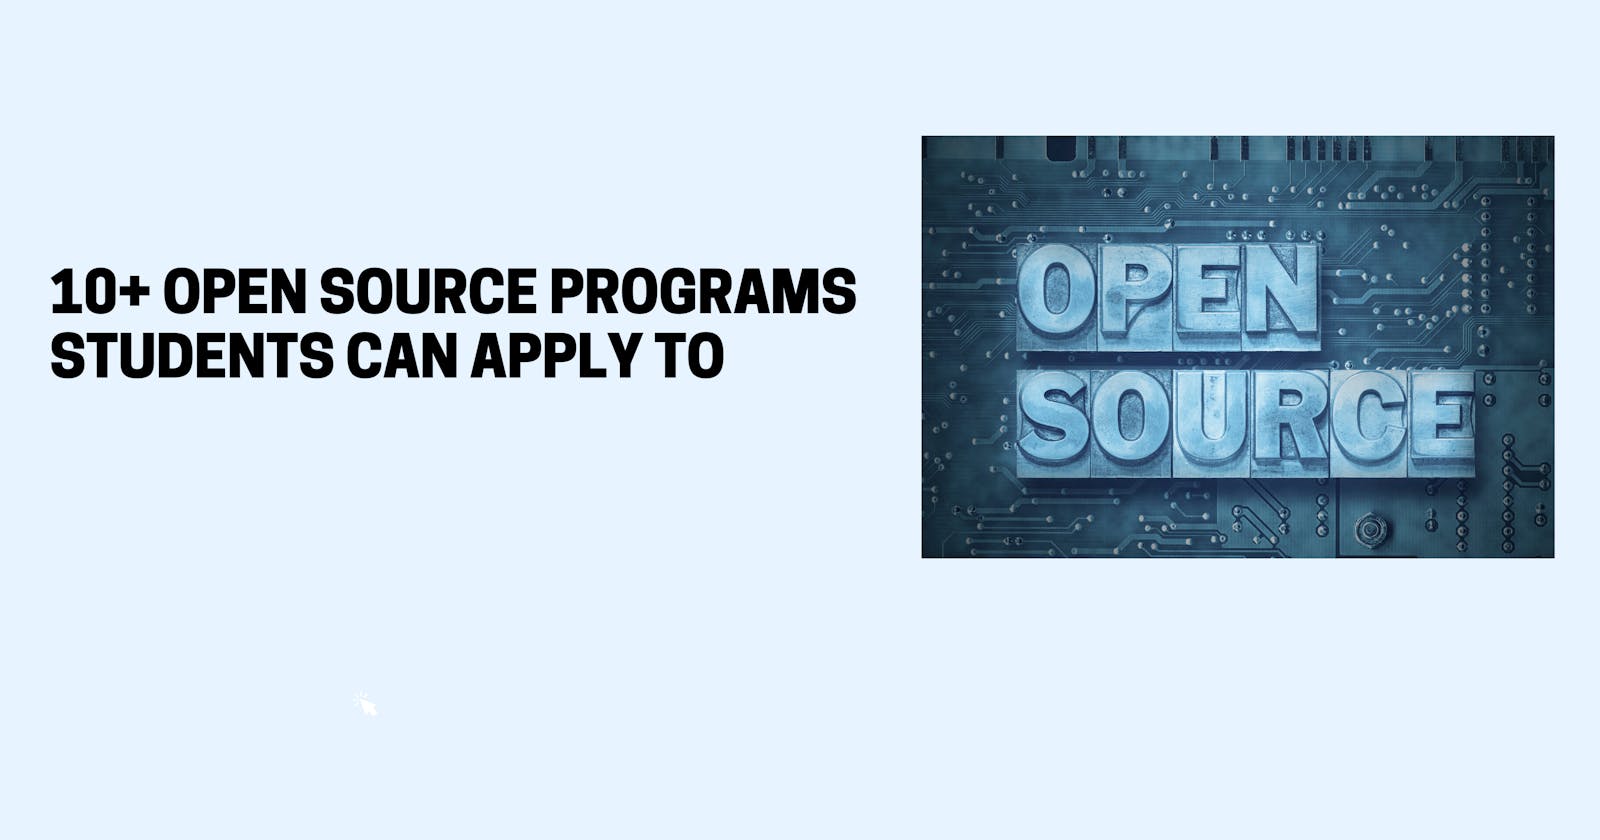 10+ Open Source Programs Students Can Apply to